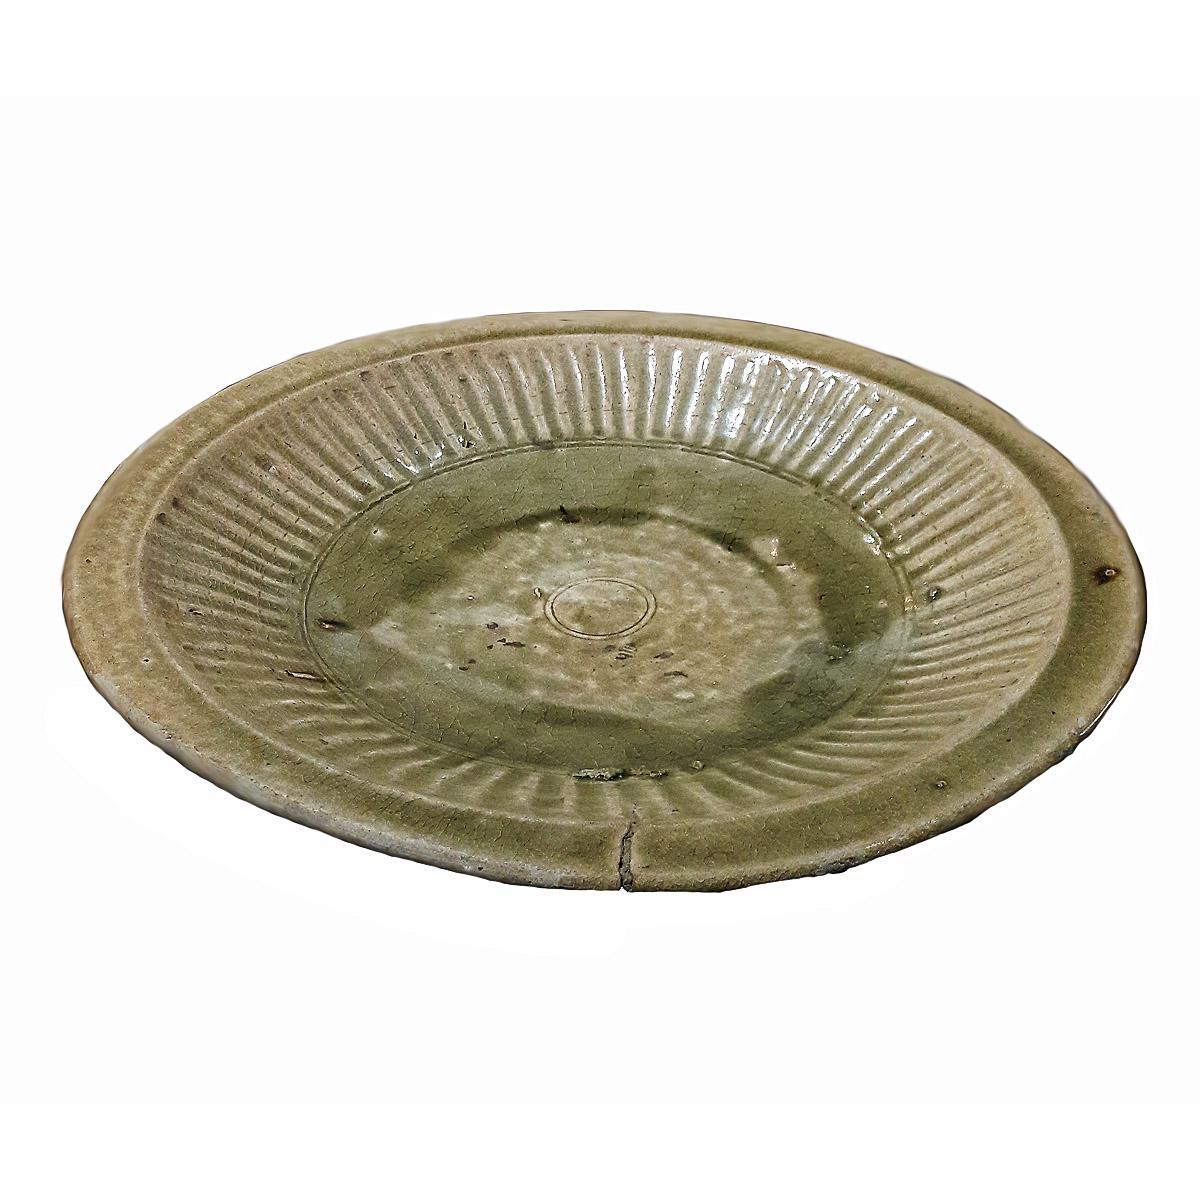 A rare celadon plate from the kilns of Sangkhalok, one of the main centers of Thai ceramics during the Sukhotai period (1230-1438) 

Well preserved for its age, this plate shows the ancient technique of Celadon glaze, with its traditional olive